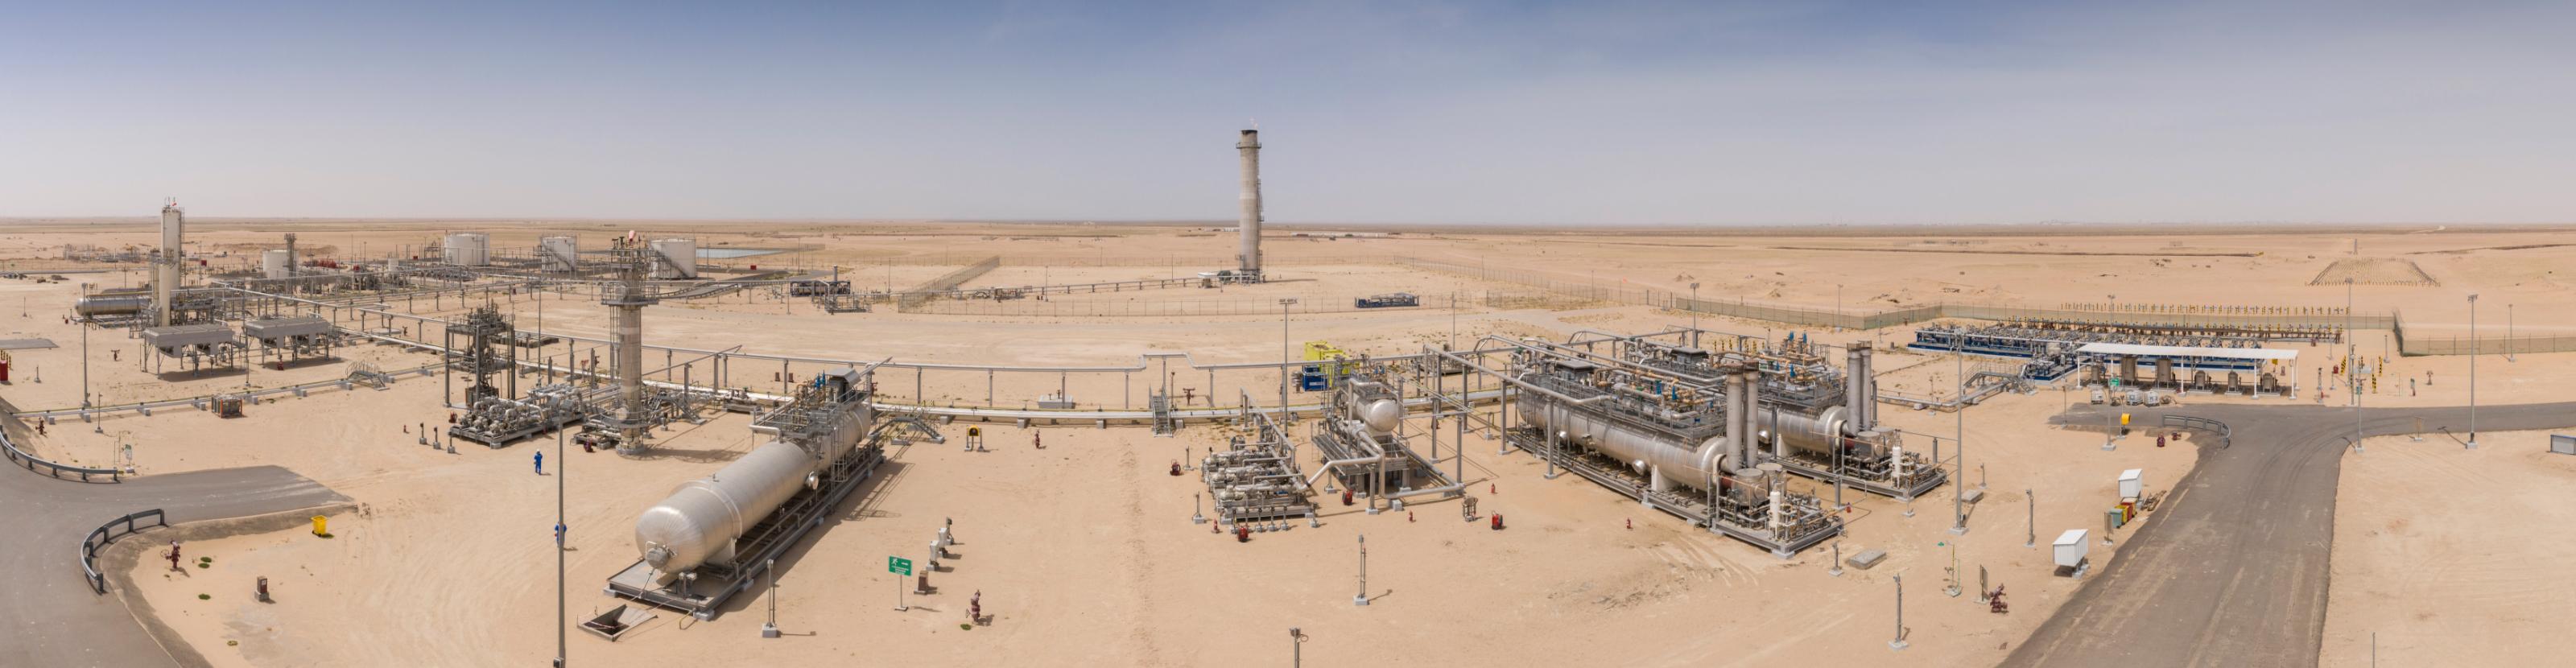 A desert processing facility with electrostatic oil treaters and other equipment.